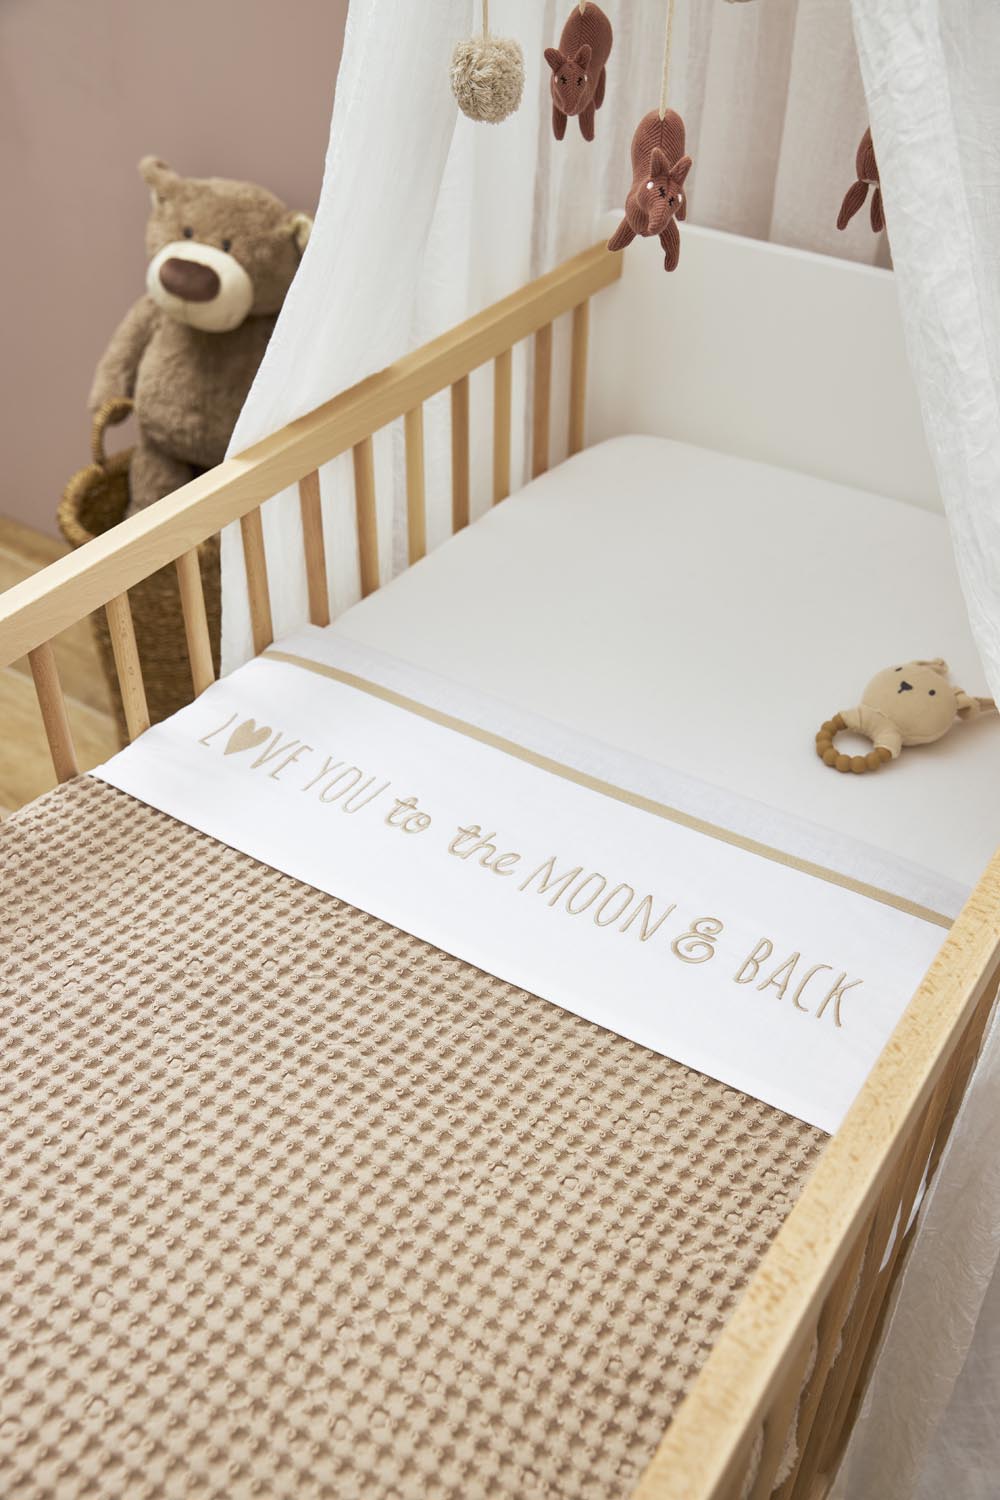 Cot bed sheet Love you to the moon & back - sand - 100x150cm